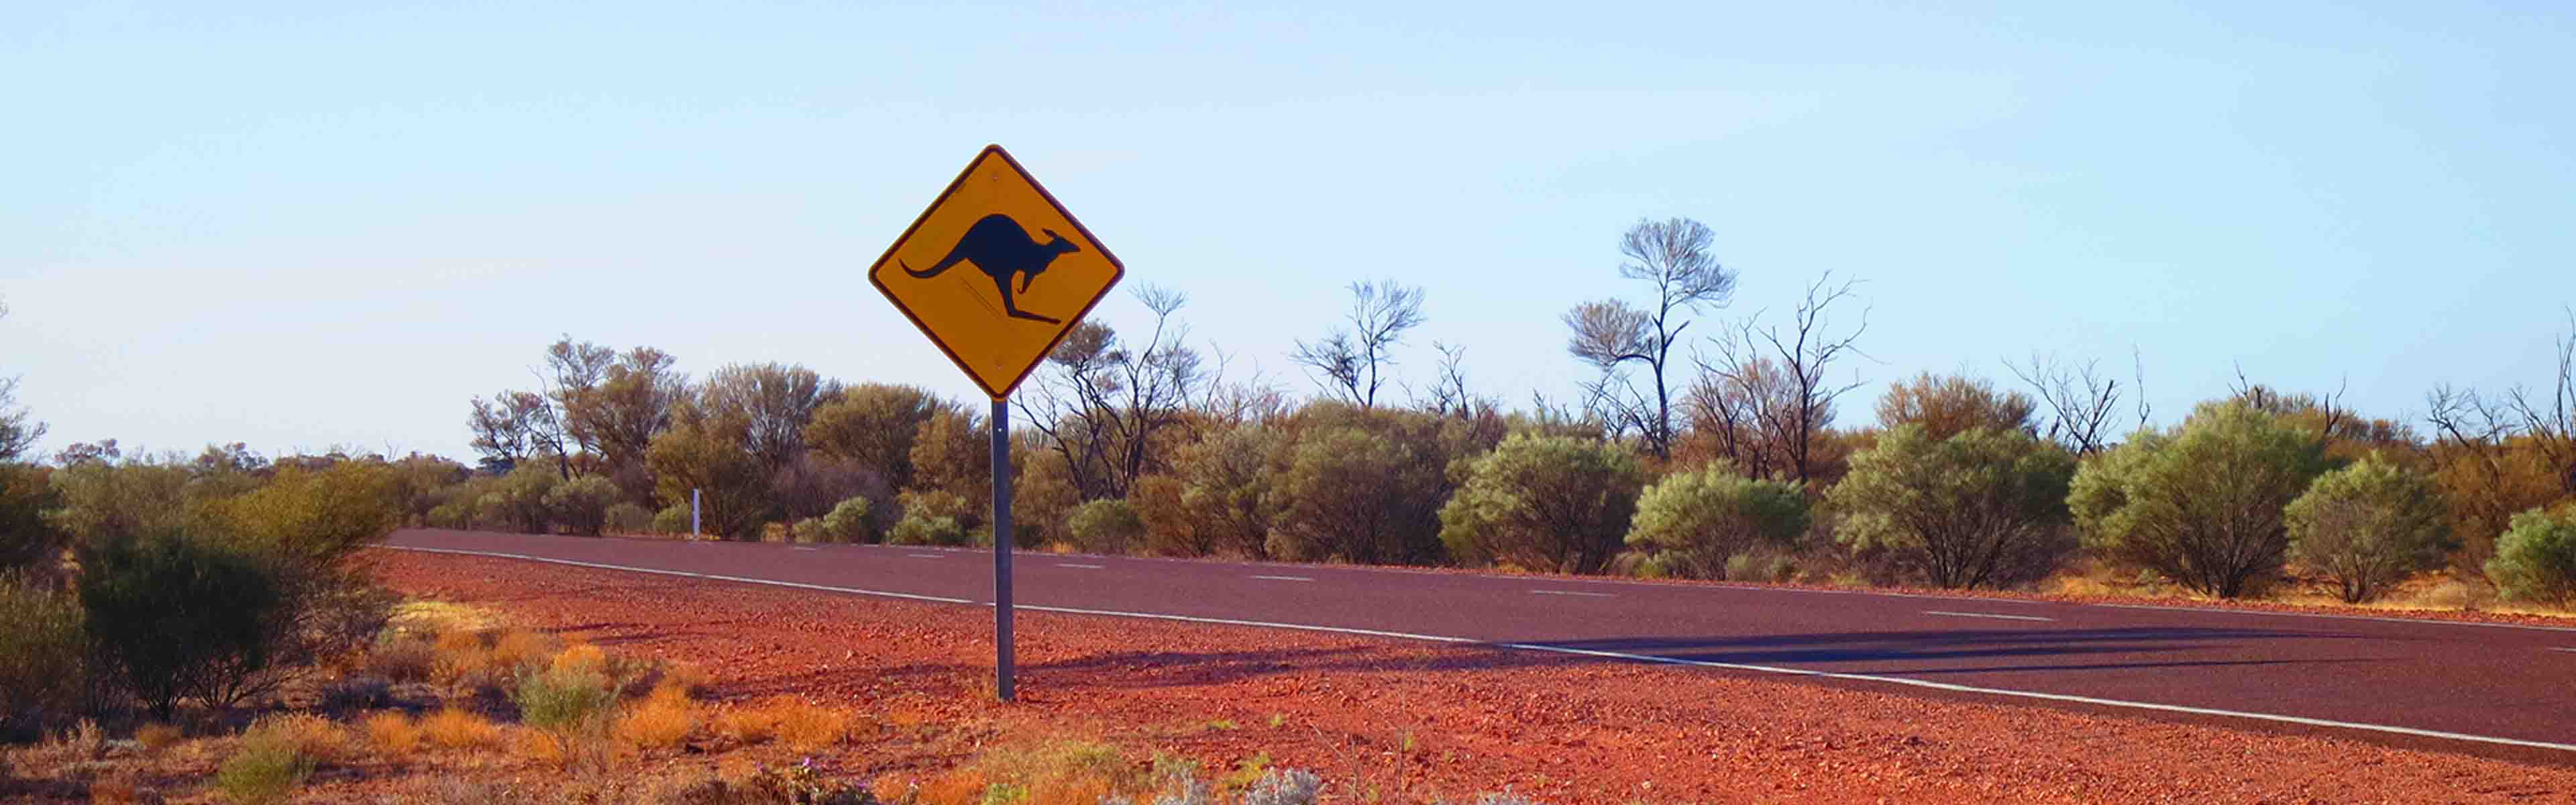 Outback road with kangaroo sign